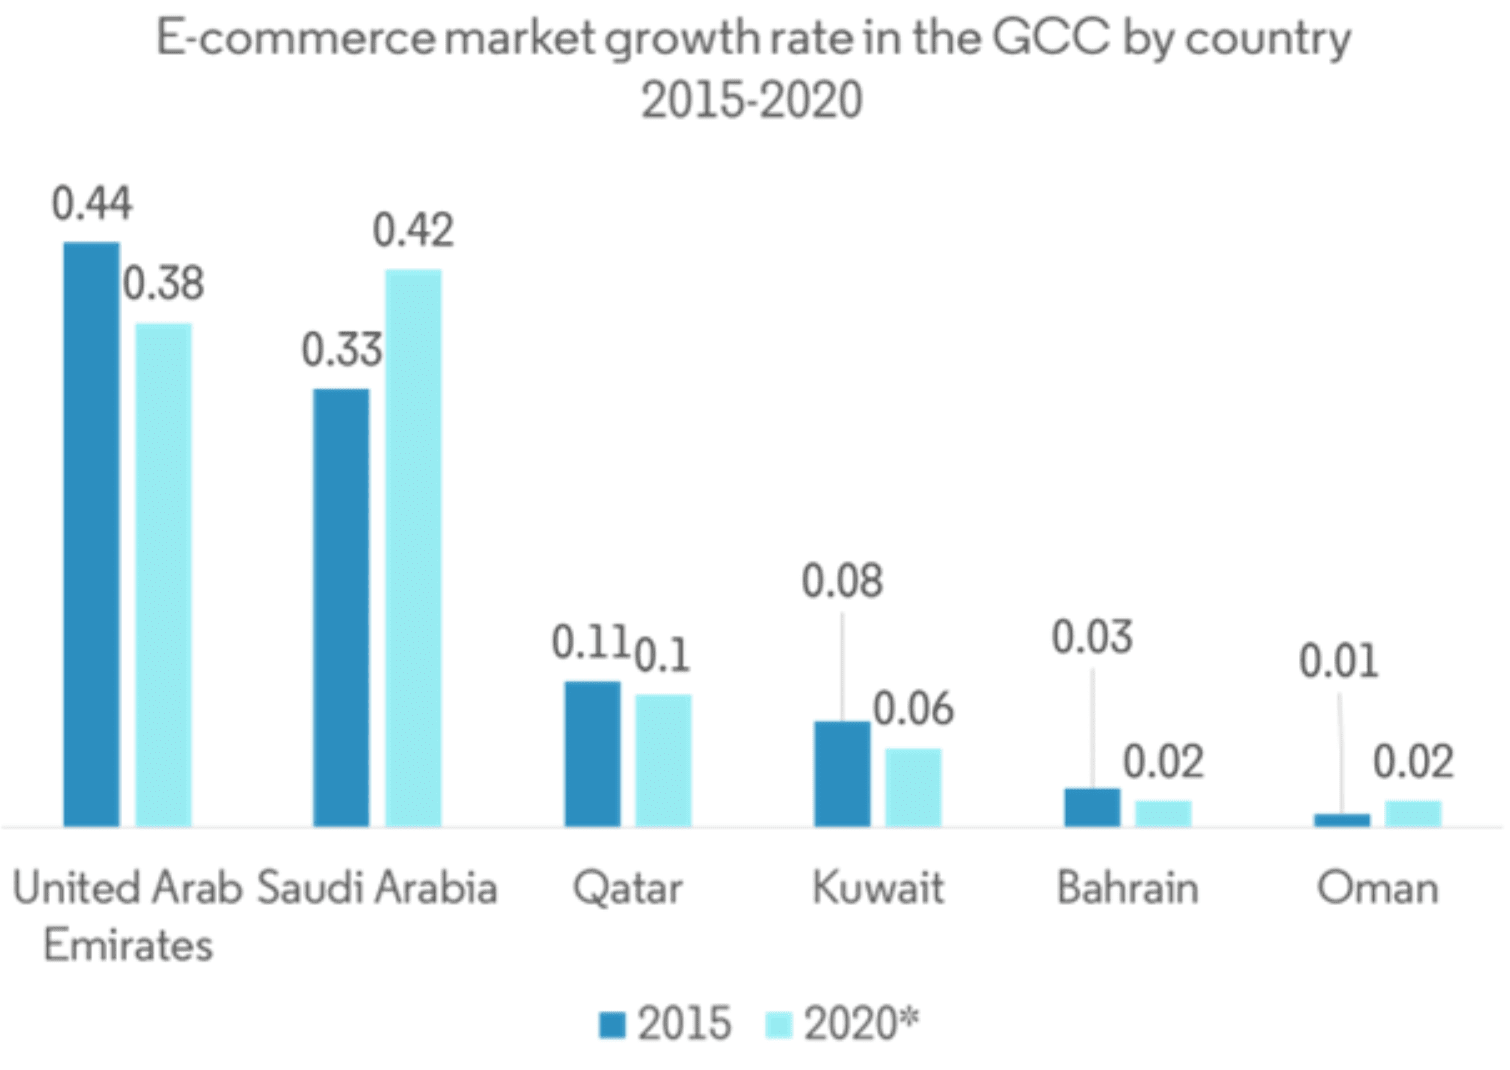 ecommerce market growth rate in gcc 2015-2020